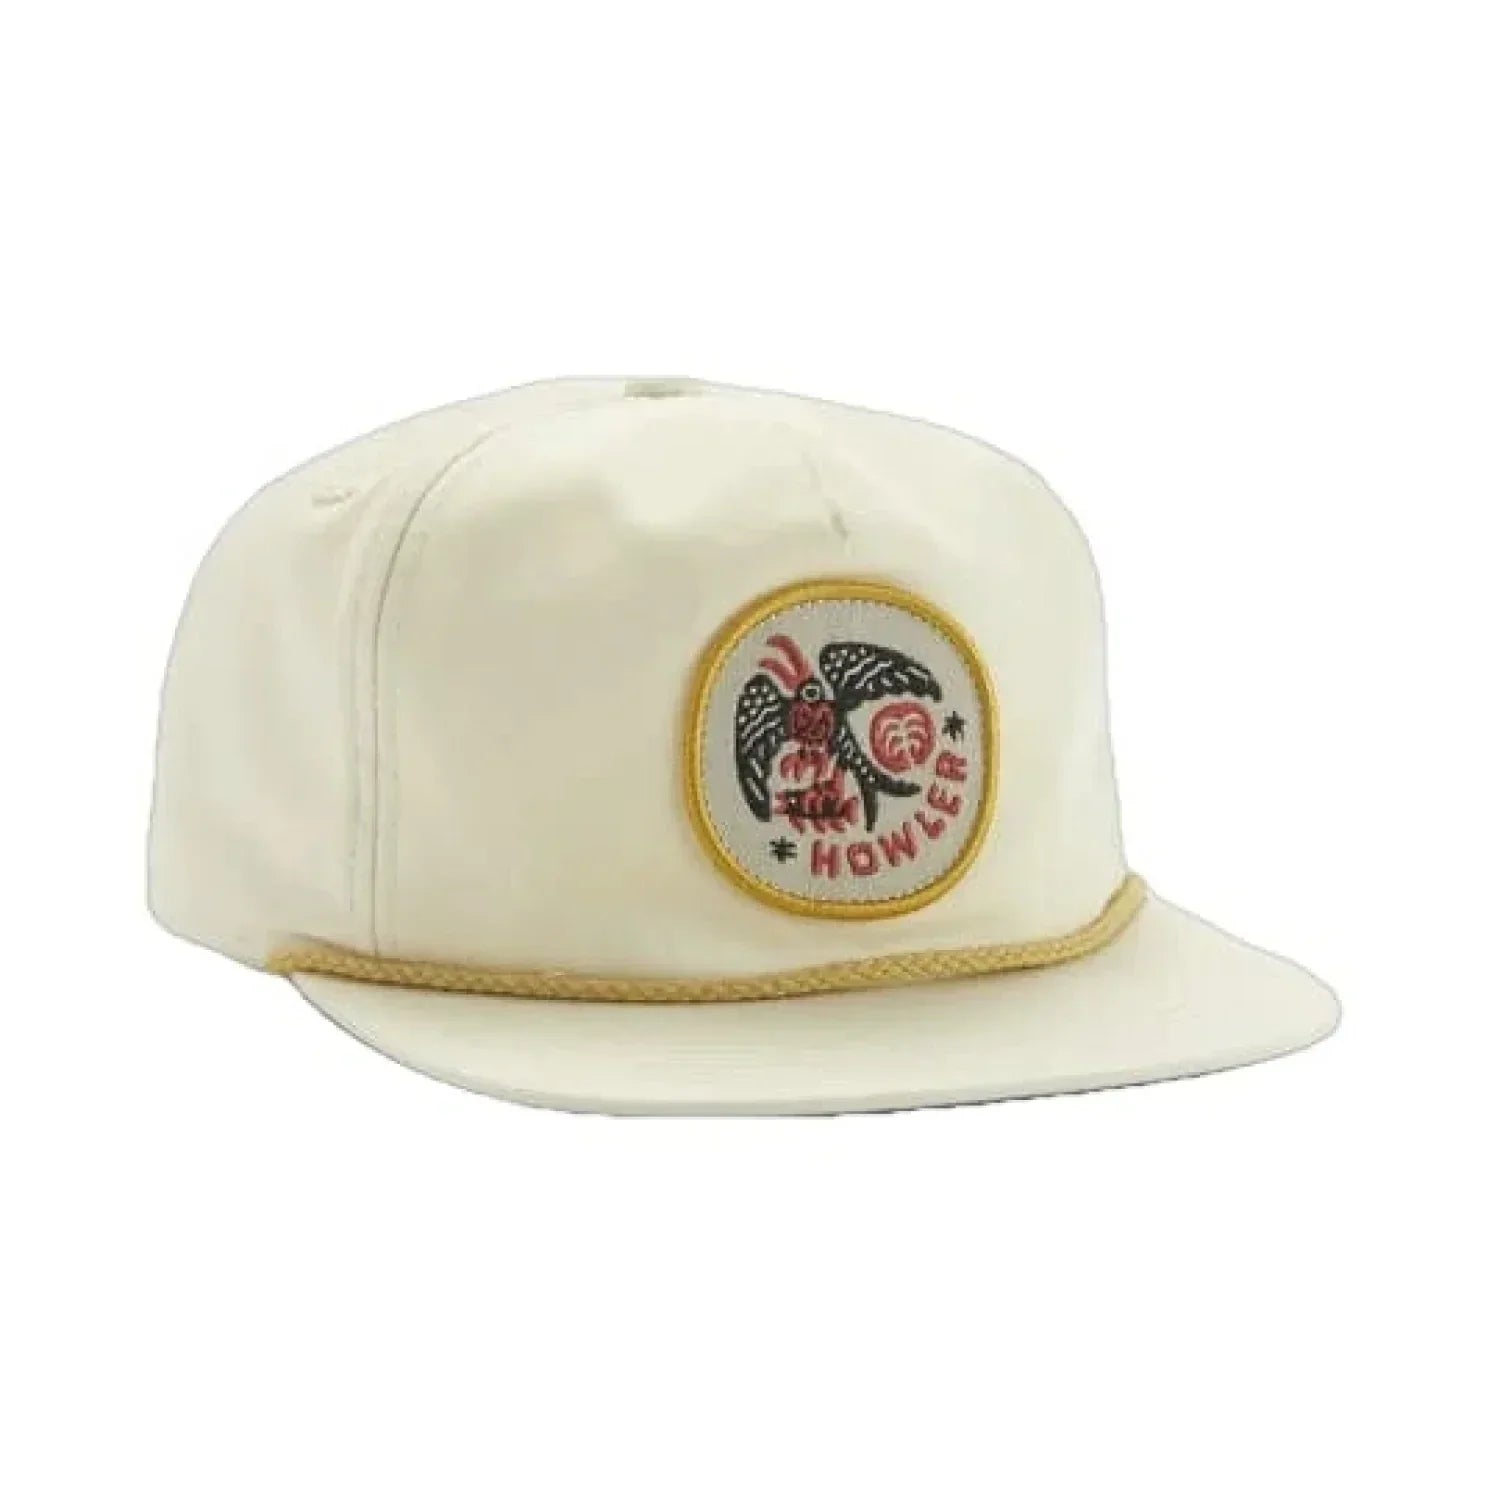 Howler Bros 20. HATS_GLOVES_SCARVES - HATS Unstructured Snapback Hats FRIGATE BADGE | OFF WHITE One Size